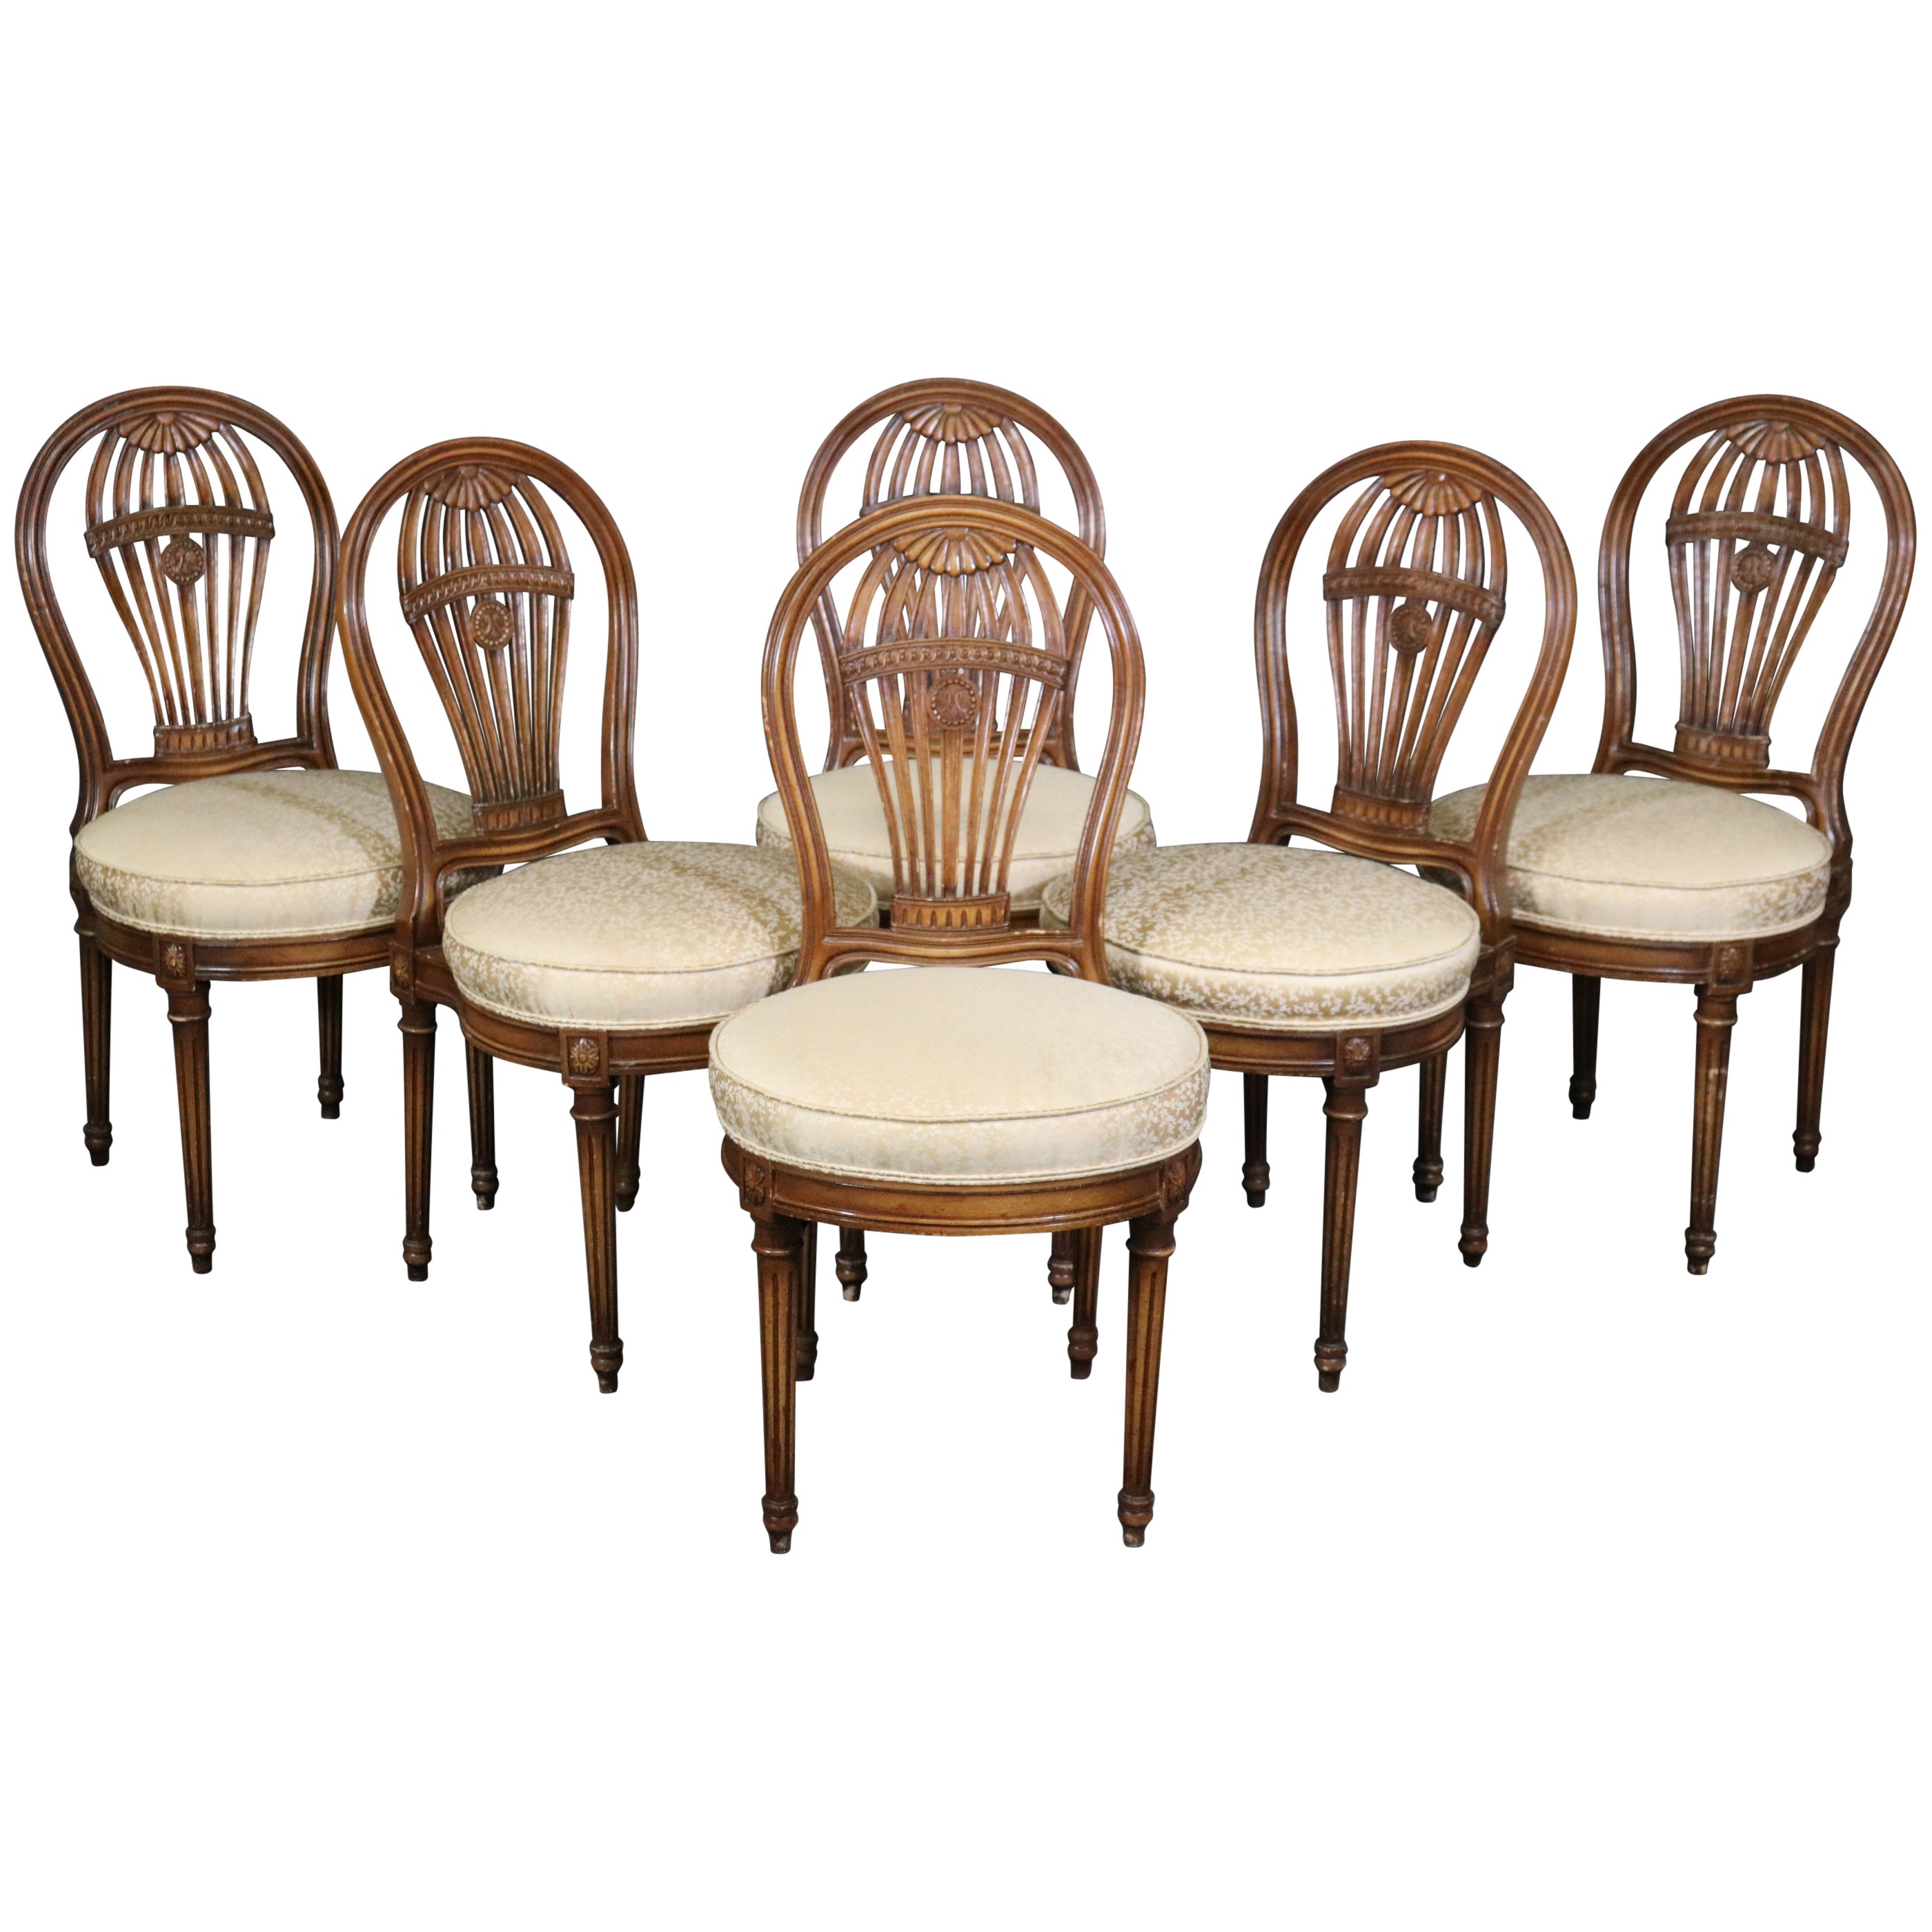 6 French Louis XVI Style Balloon Dining Chairs in the Manner of Maison Jansen